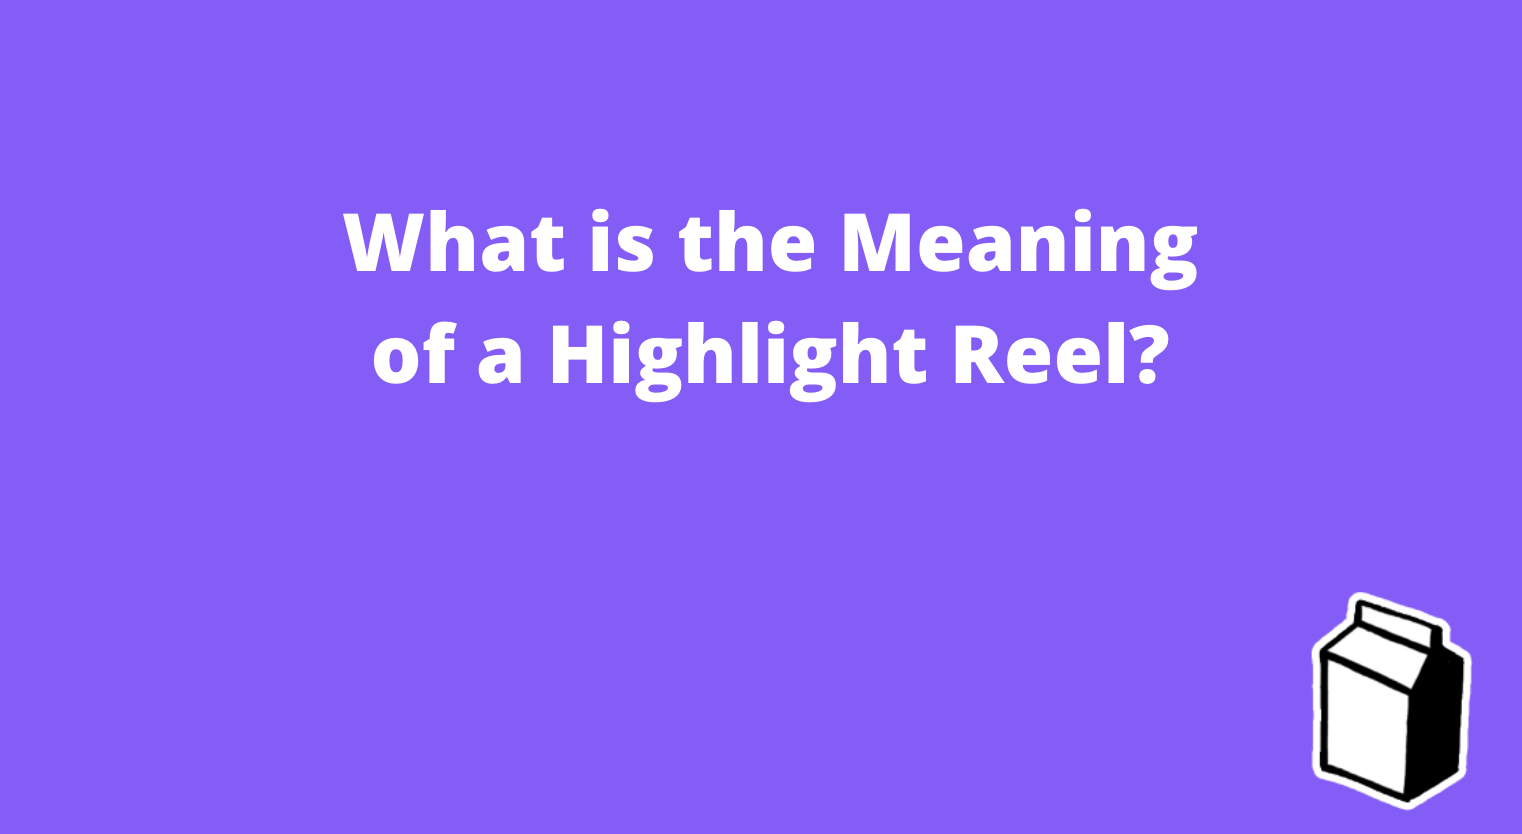 what is a highlight reel?